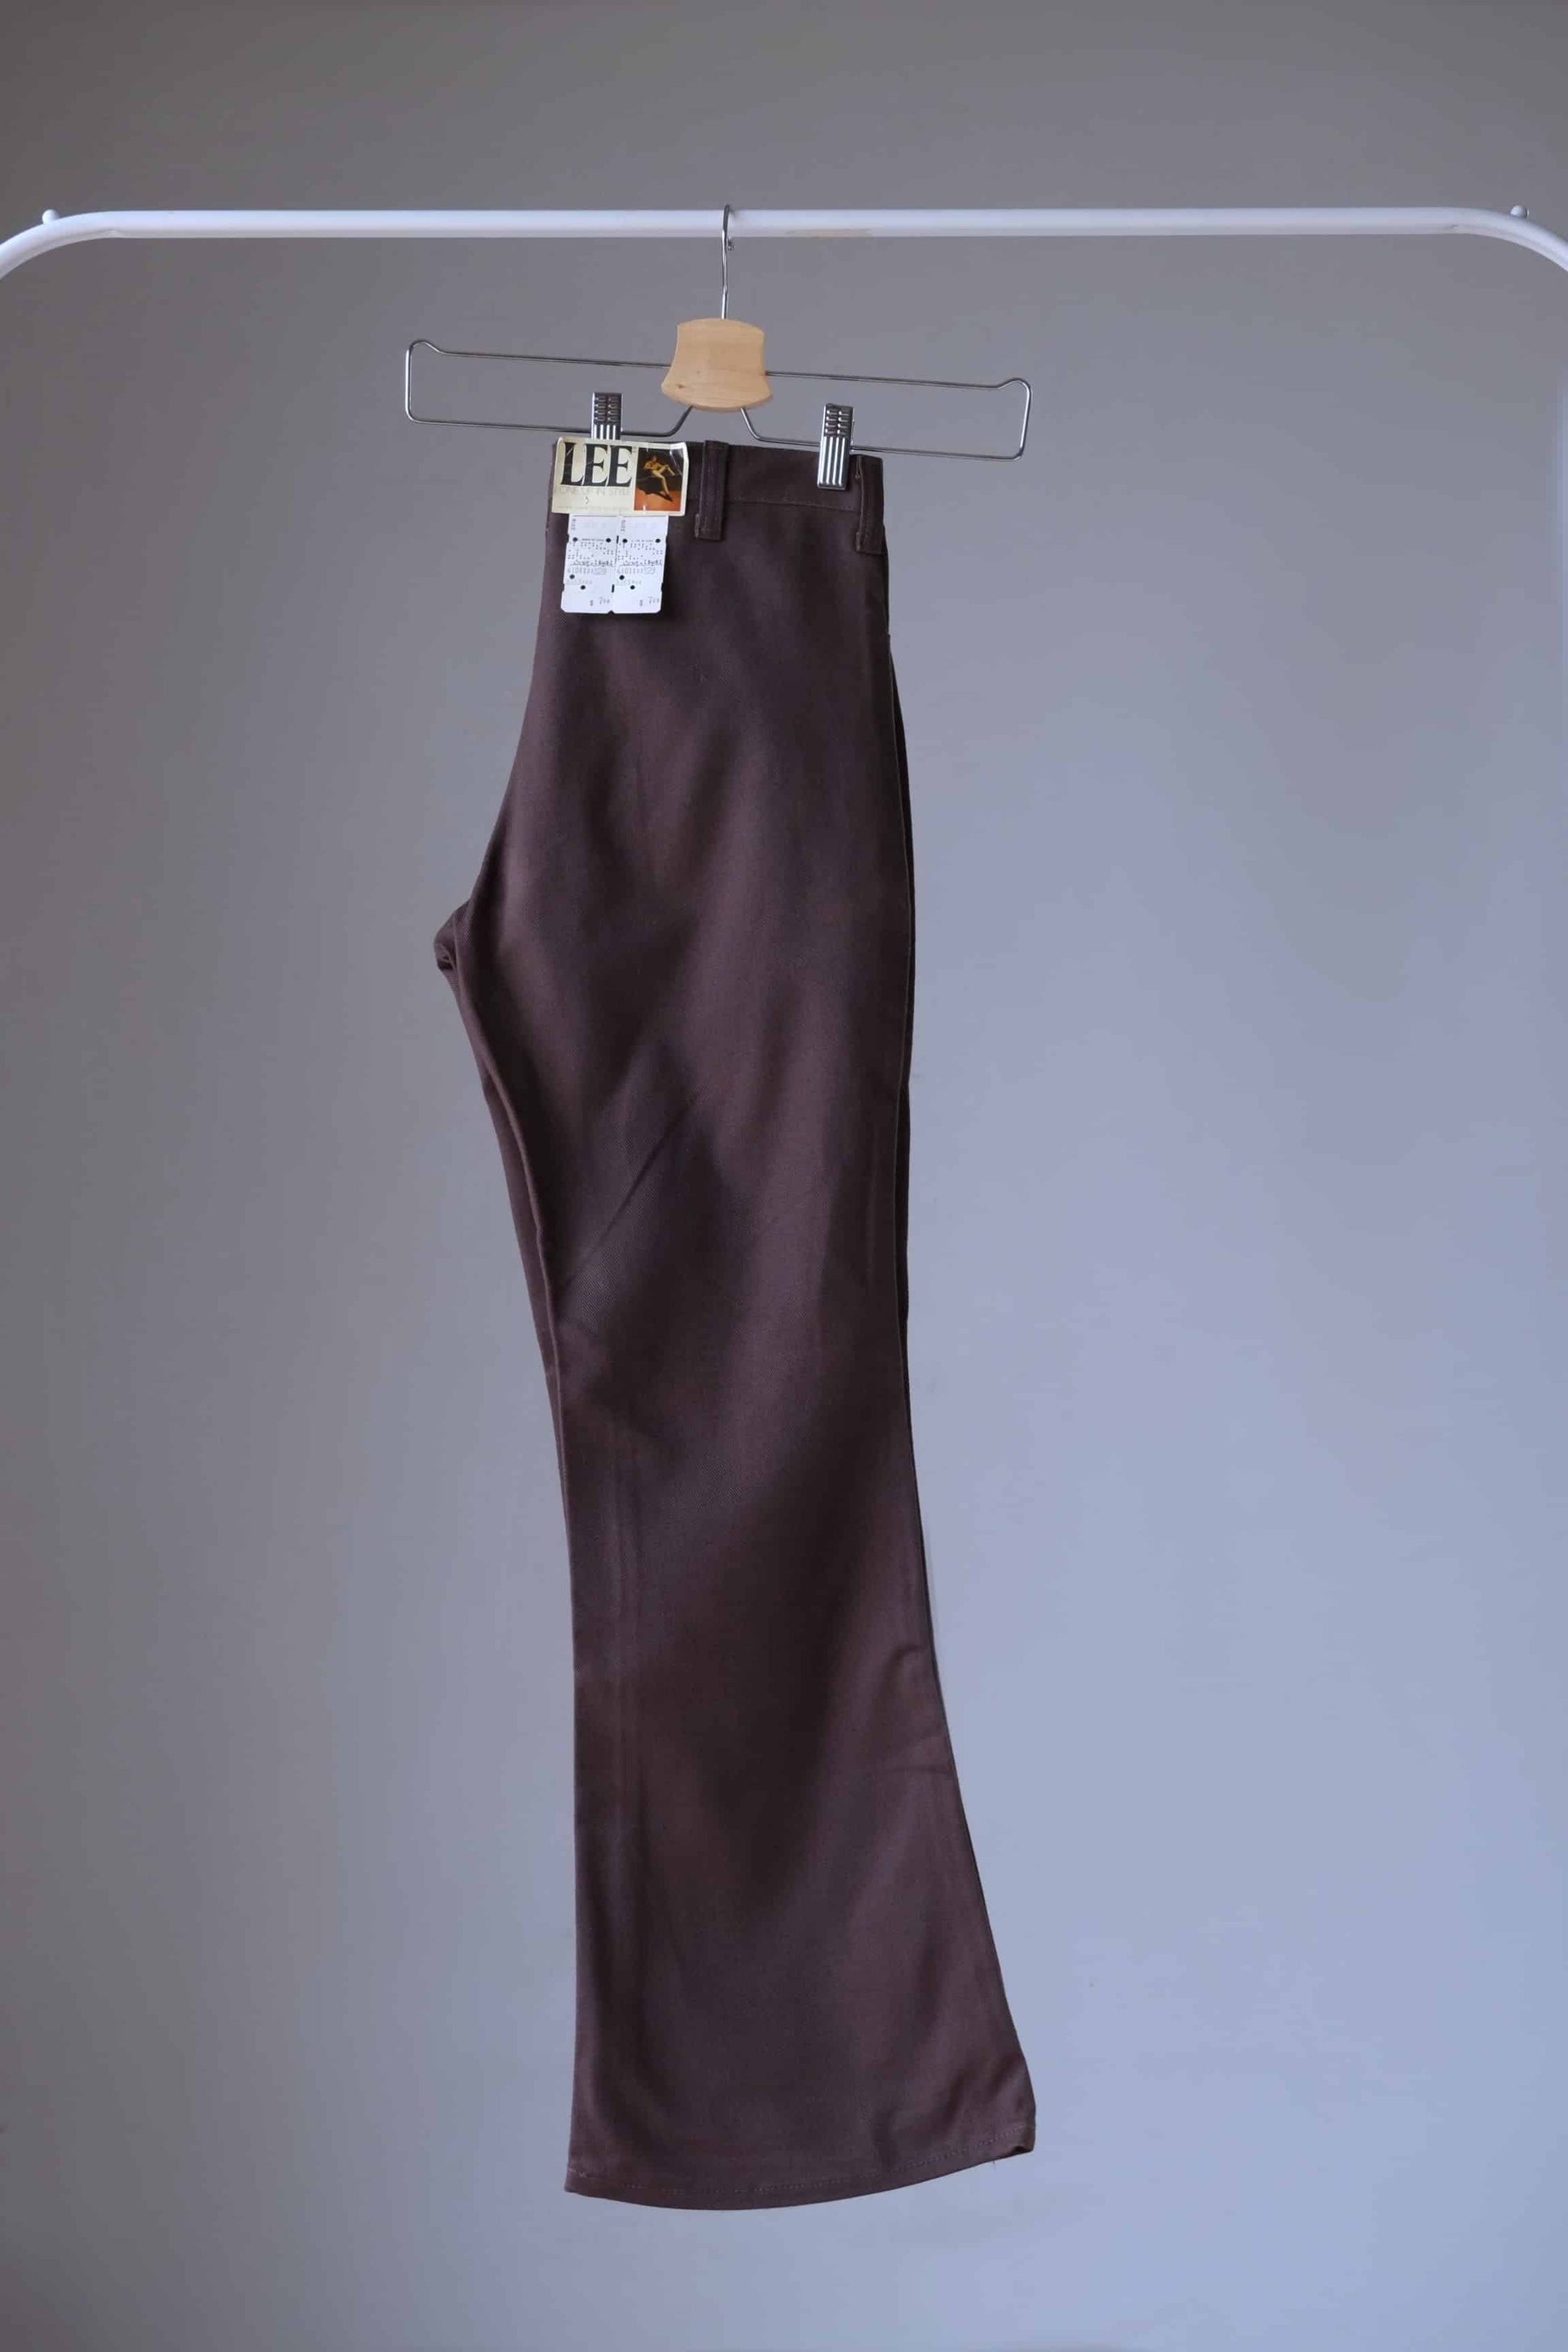 Side view of a pair of brown Vintage Lee flared pants on hanger showing the tag